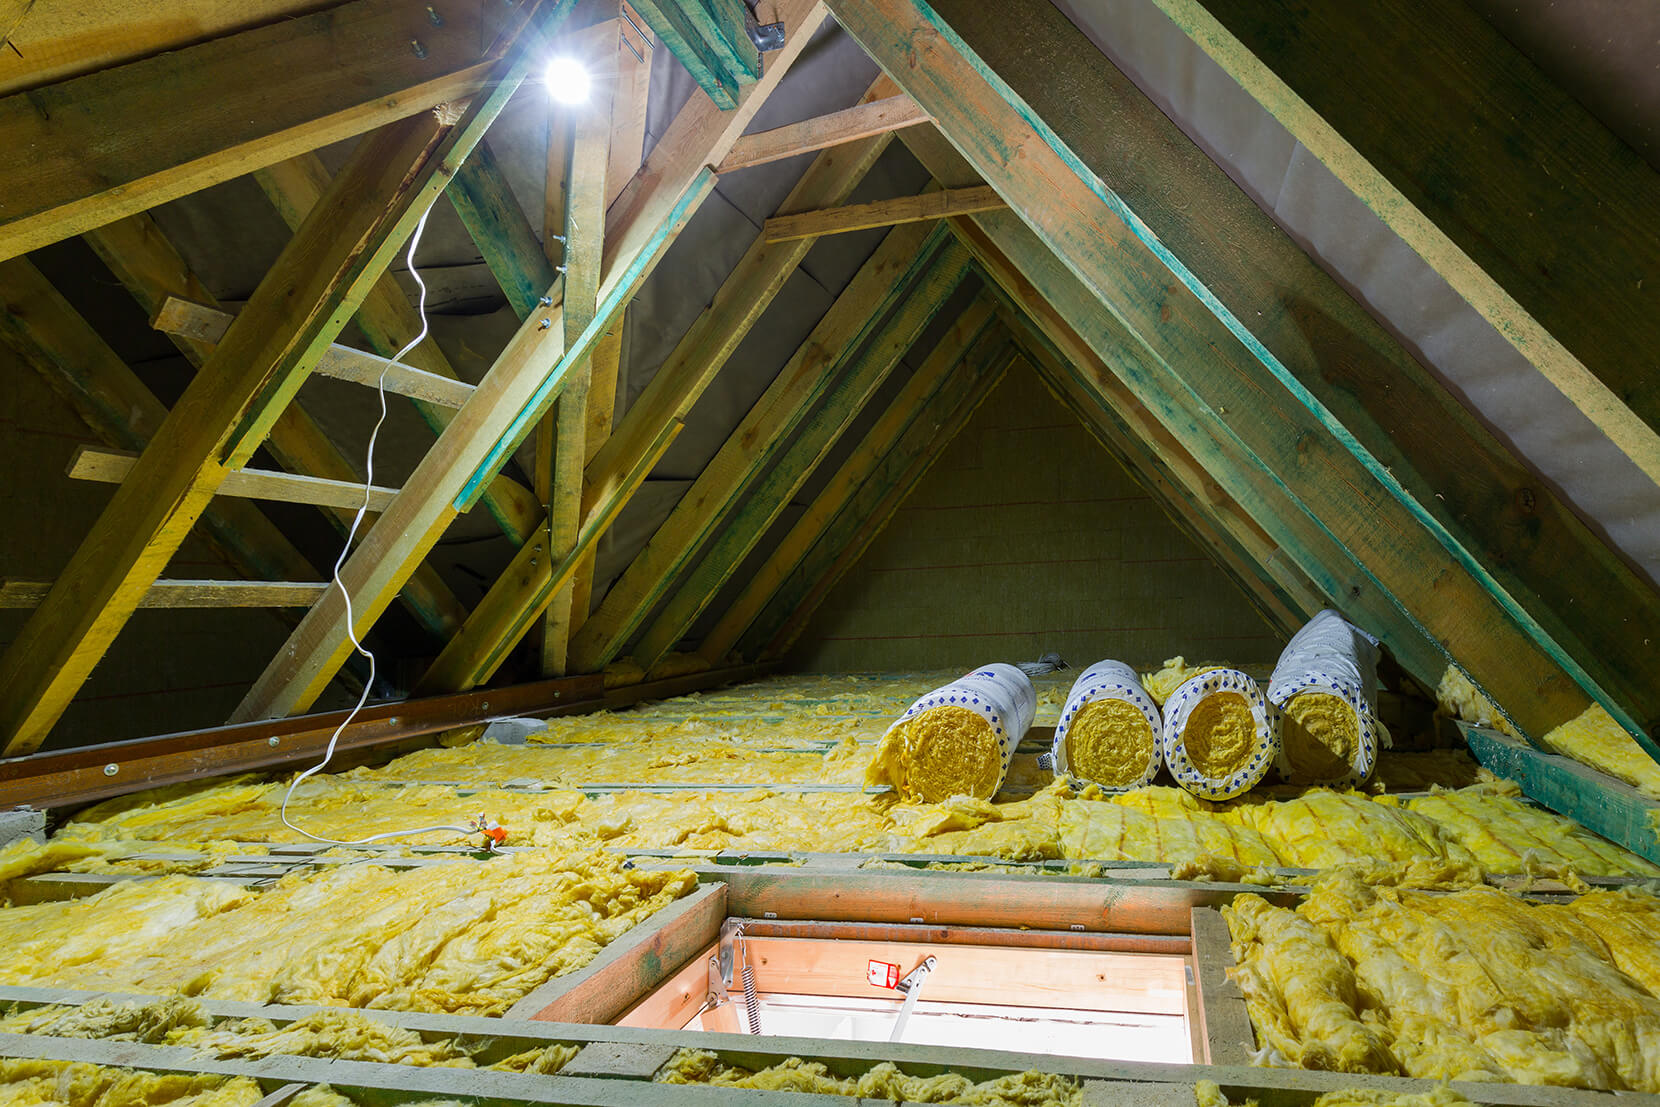 Installing insulation to keep your home warm